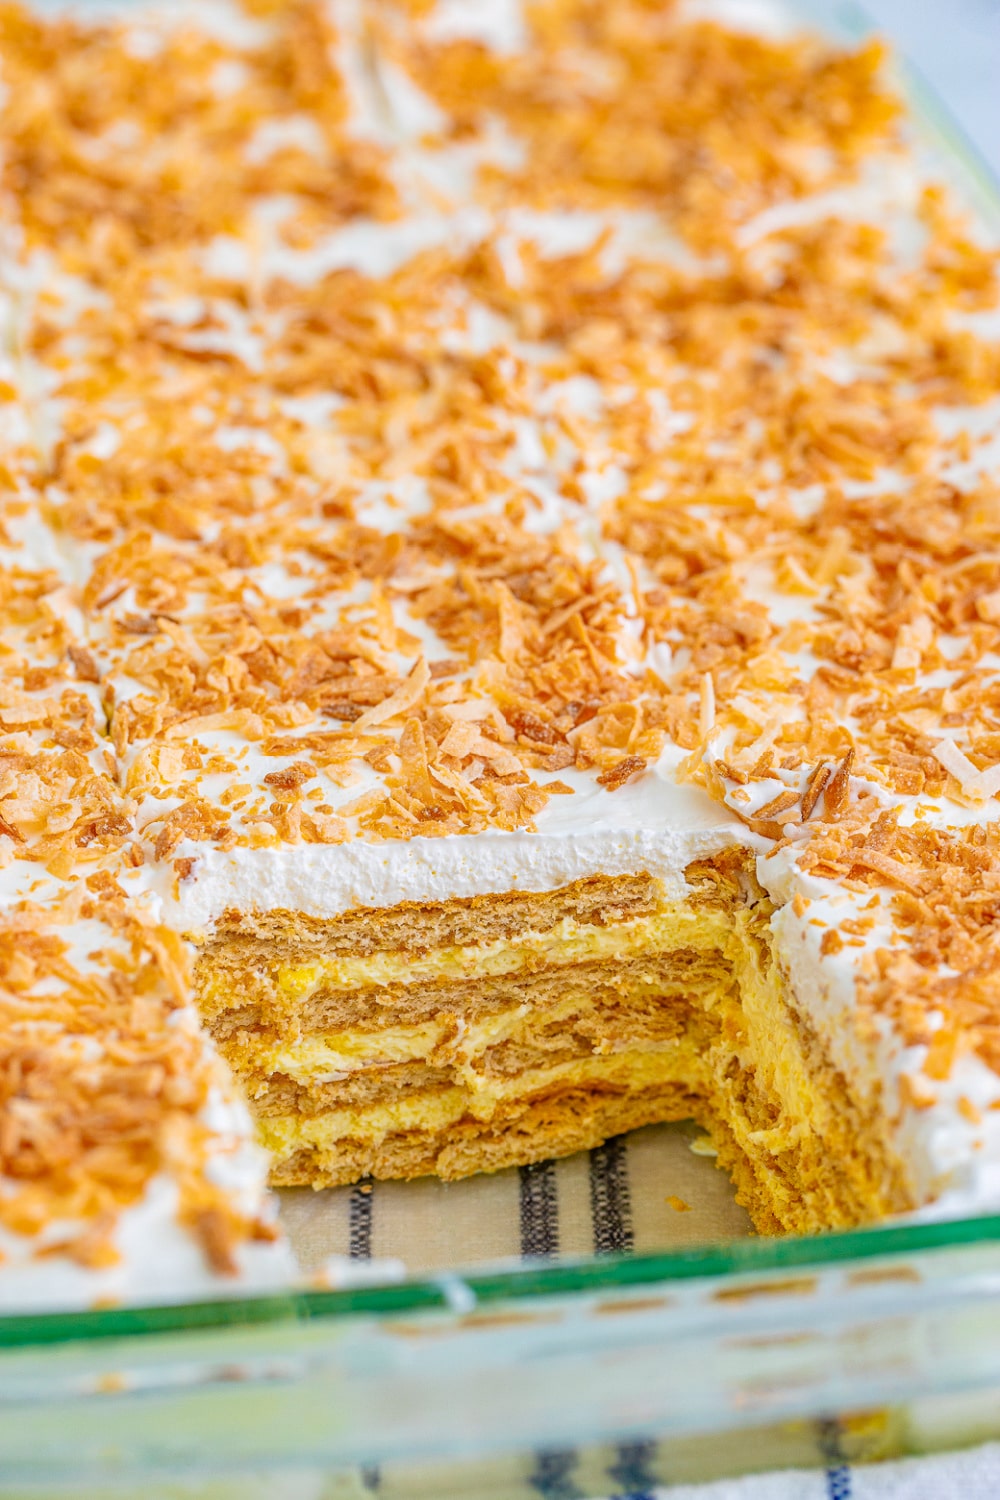 Coconut Icebox Cake in a clear glass cake pan.